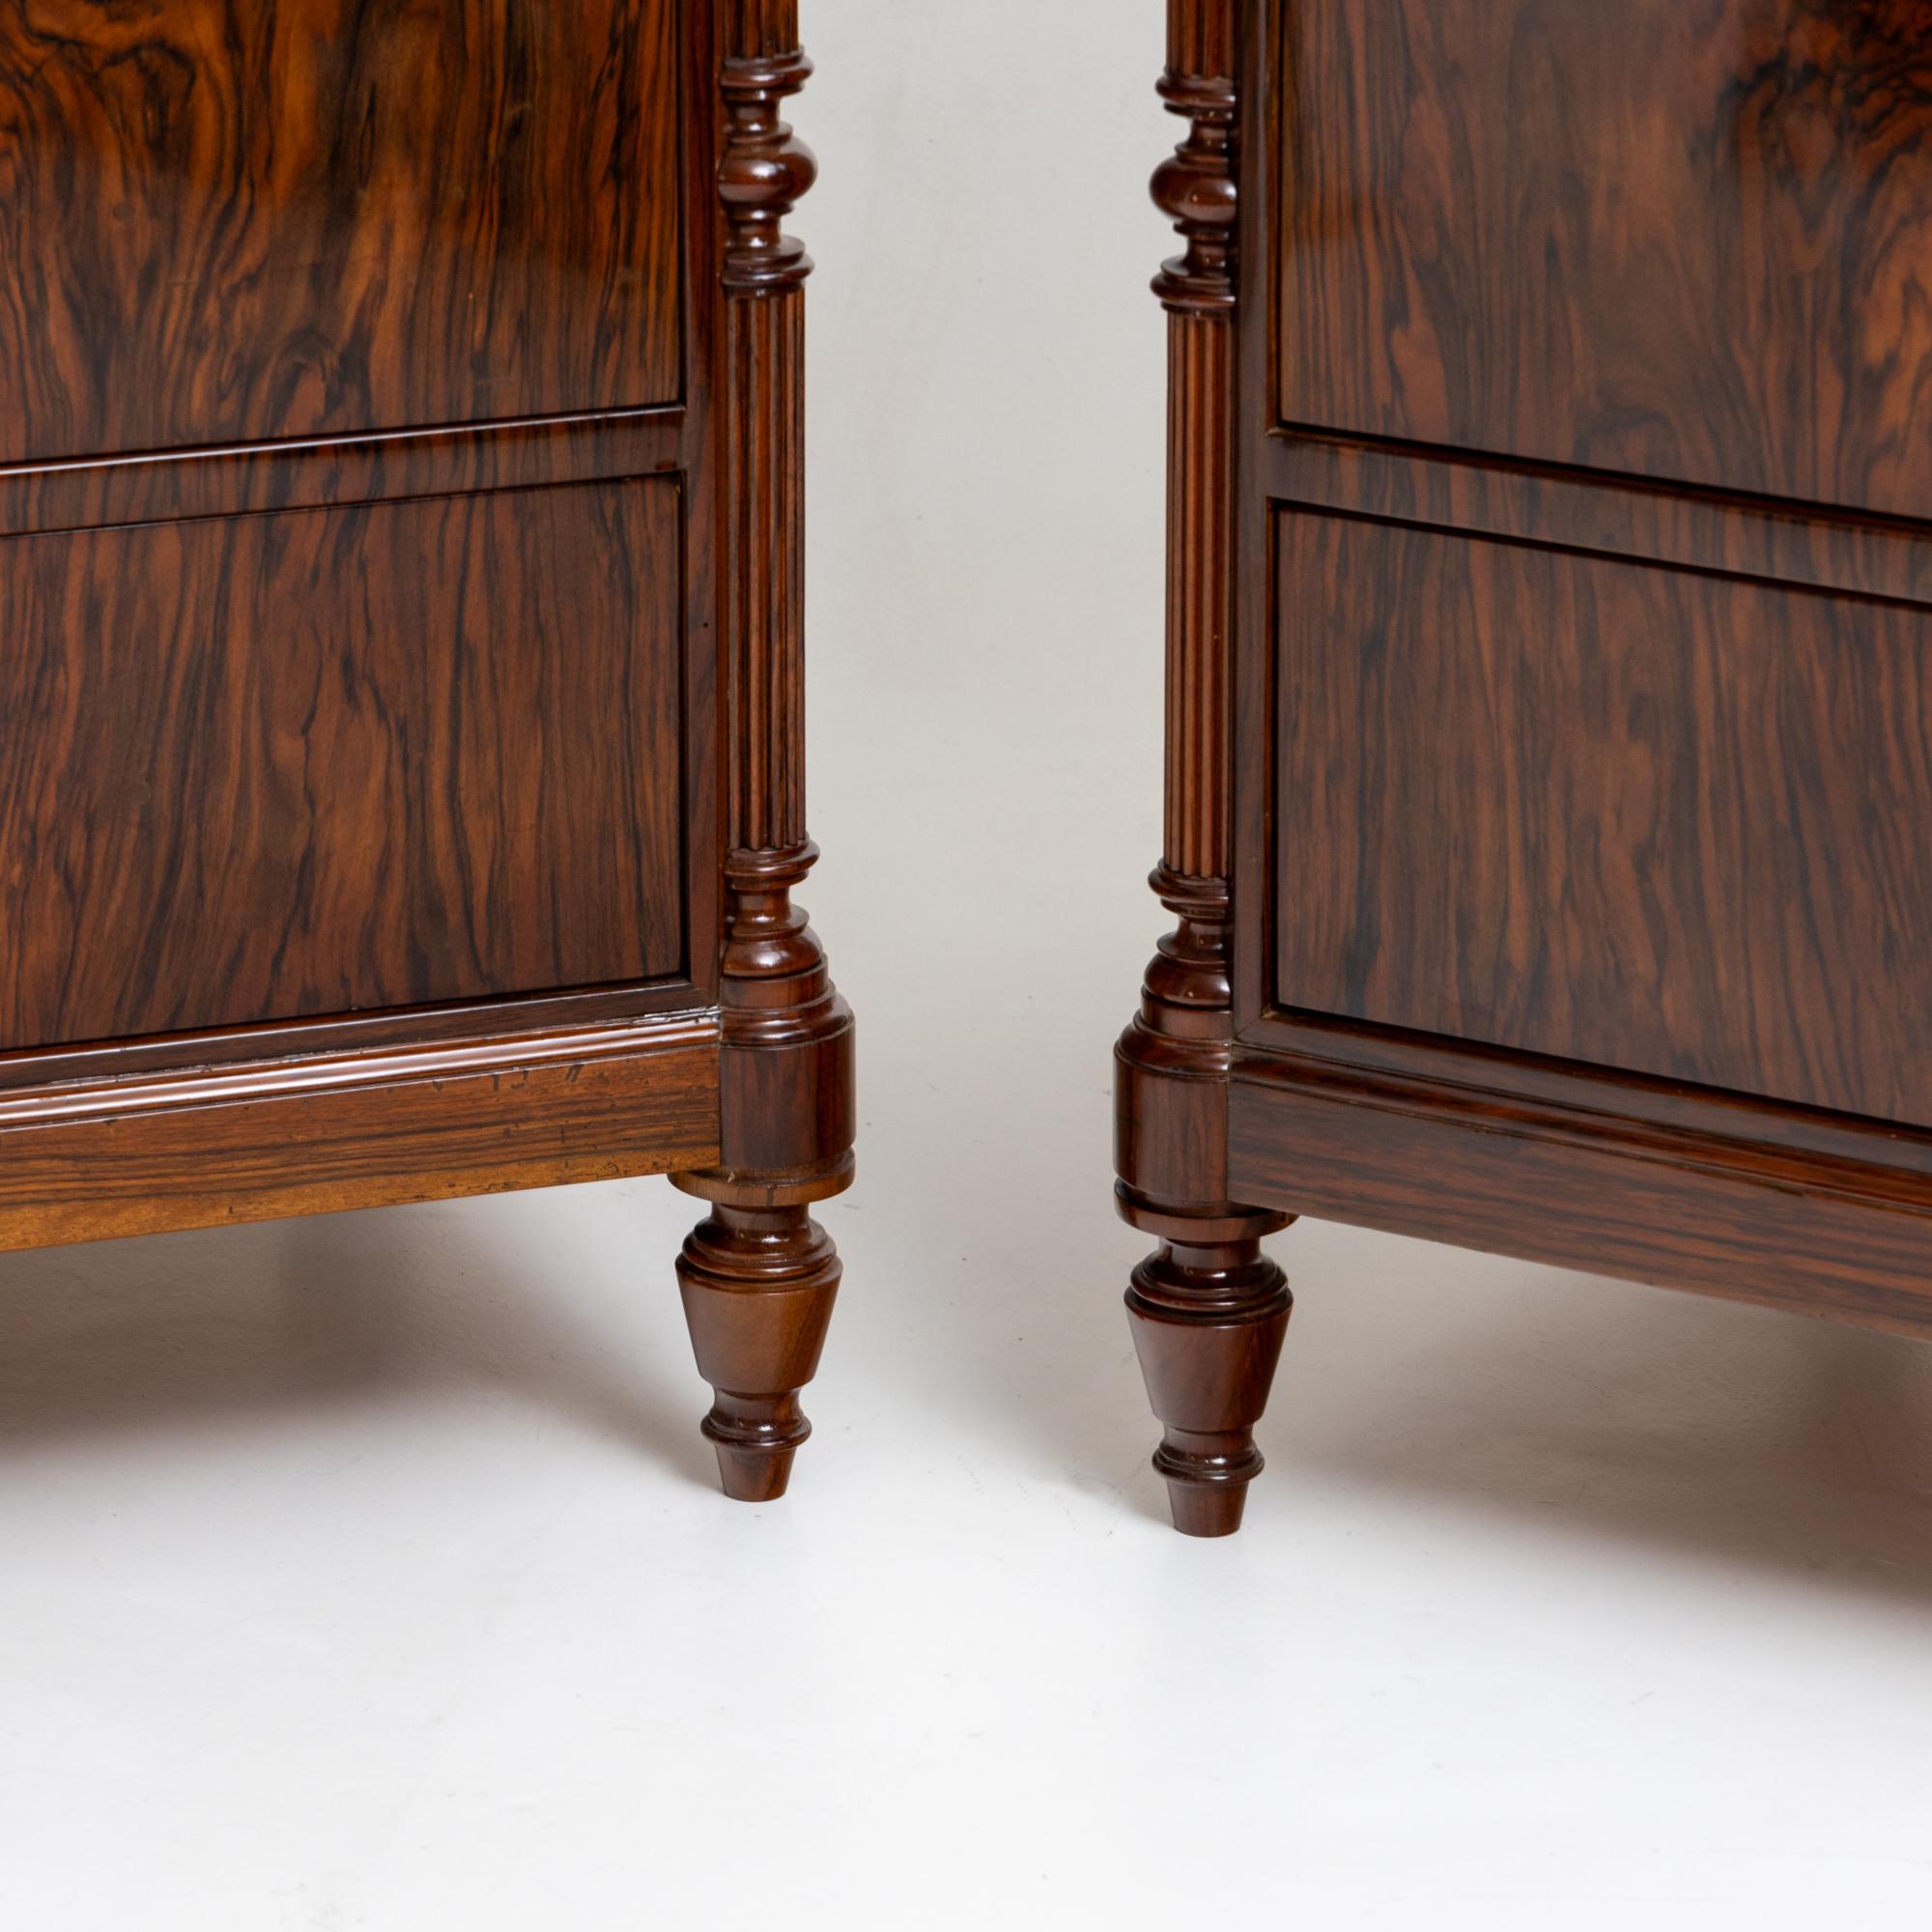 Pair of Chests of Drawers with Marble Tops, Mid-19th Century For Sale 2